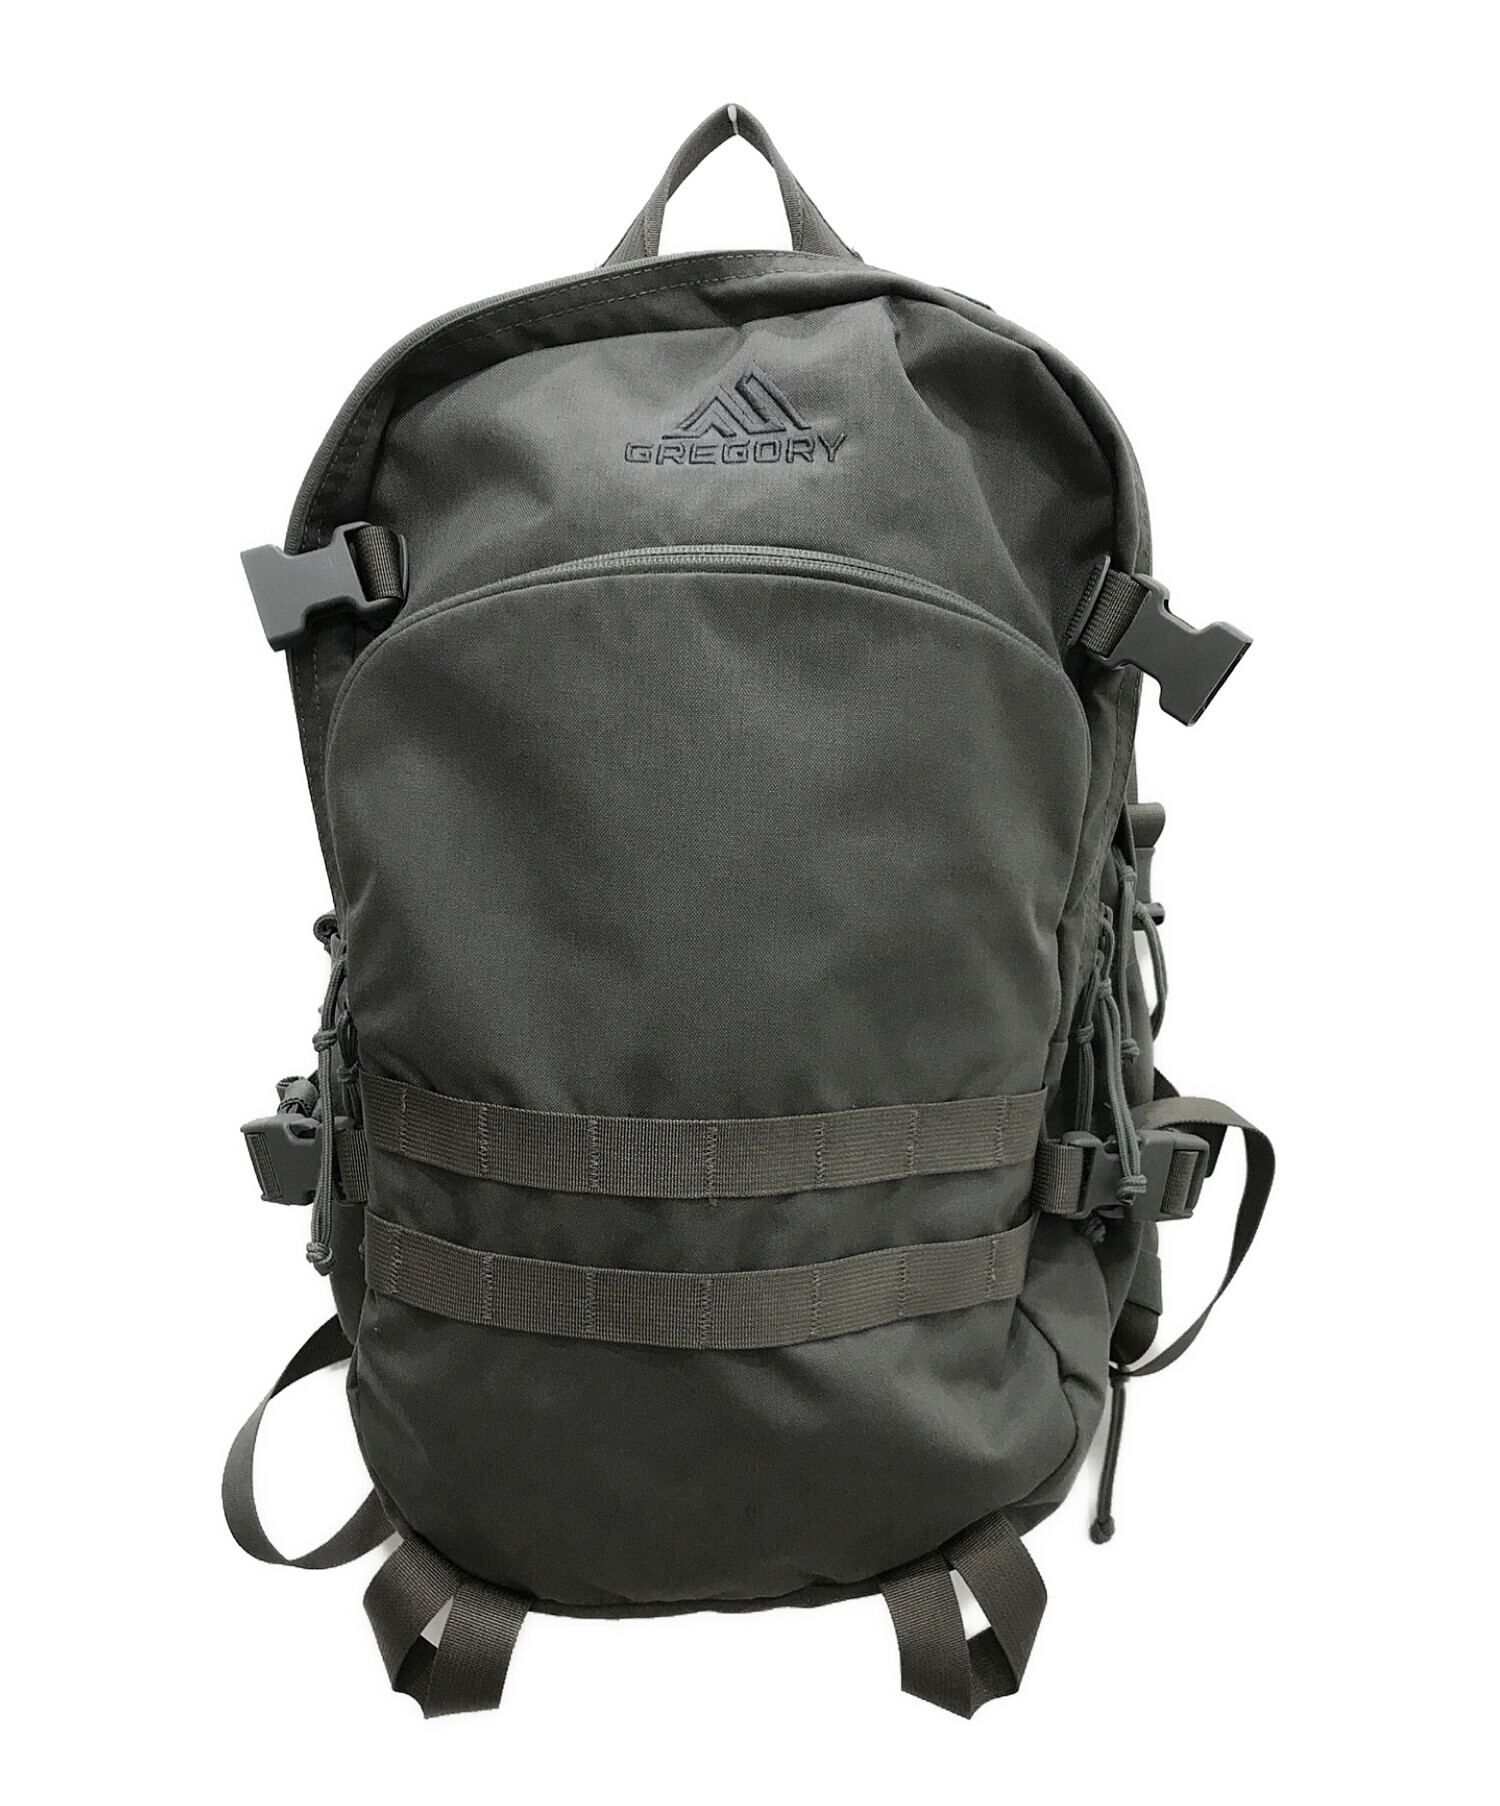 GREGORY × Pilgrim Surf＋Supply Recon Pack - リュック/バックパック